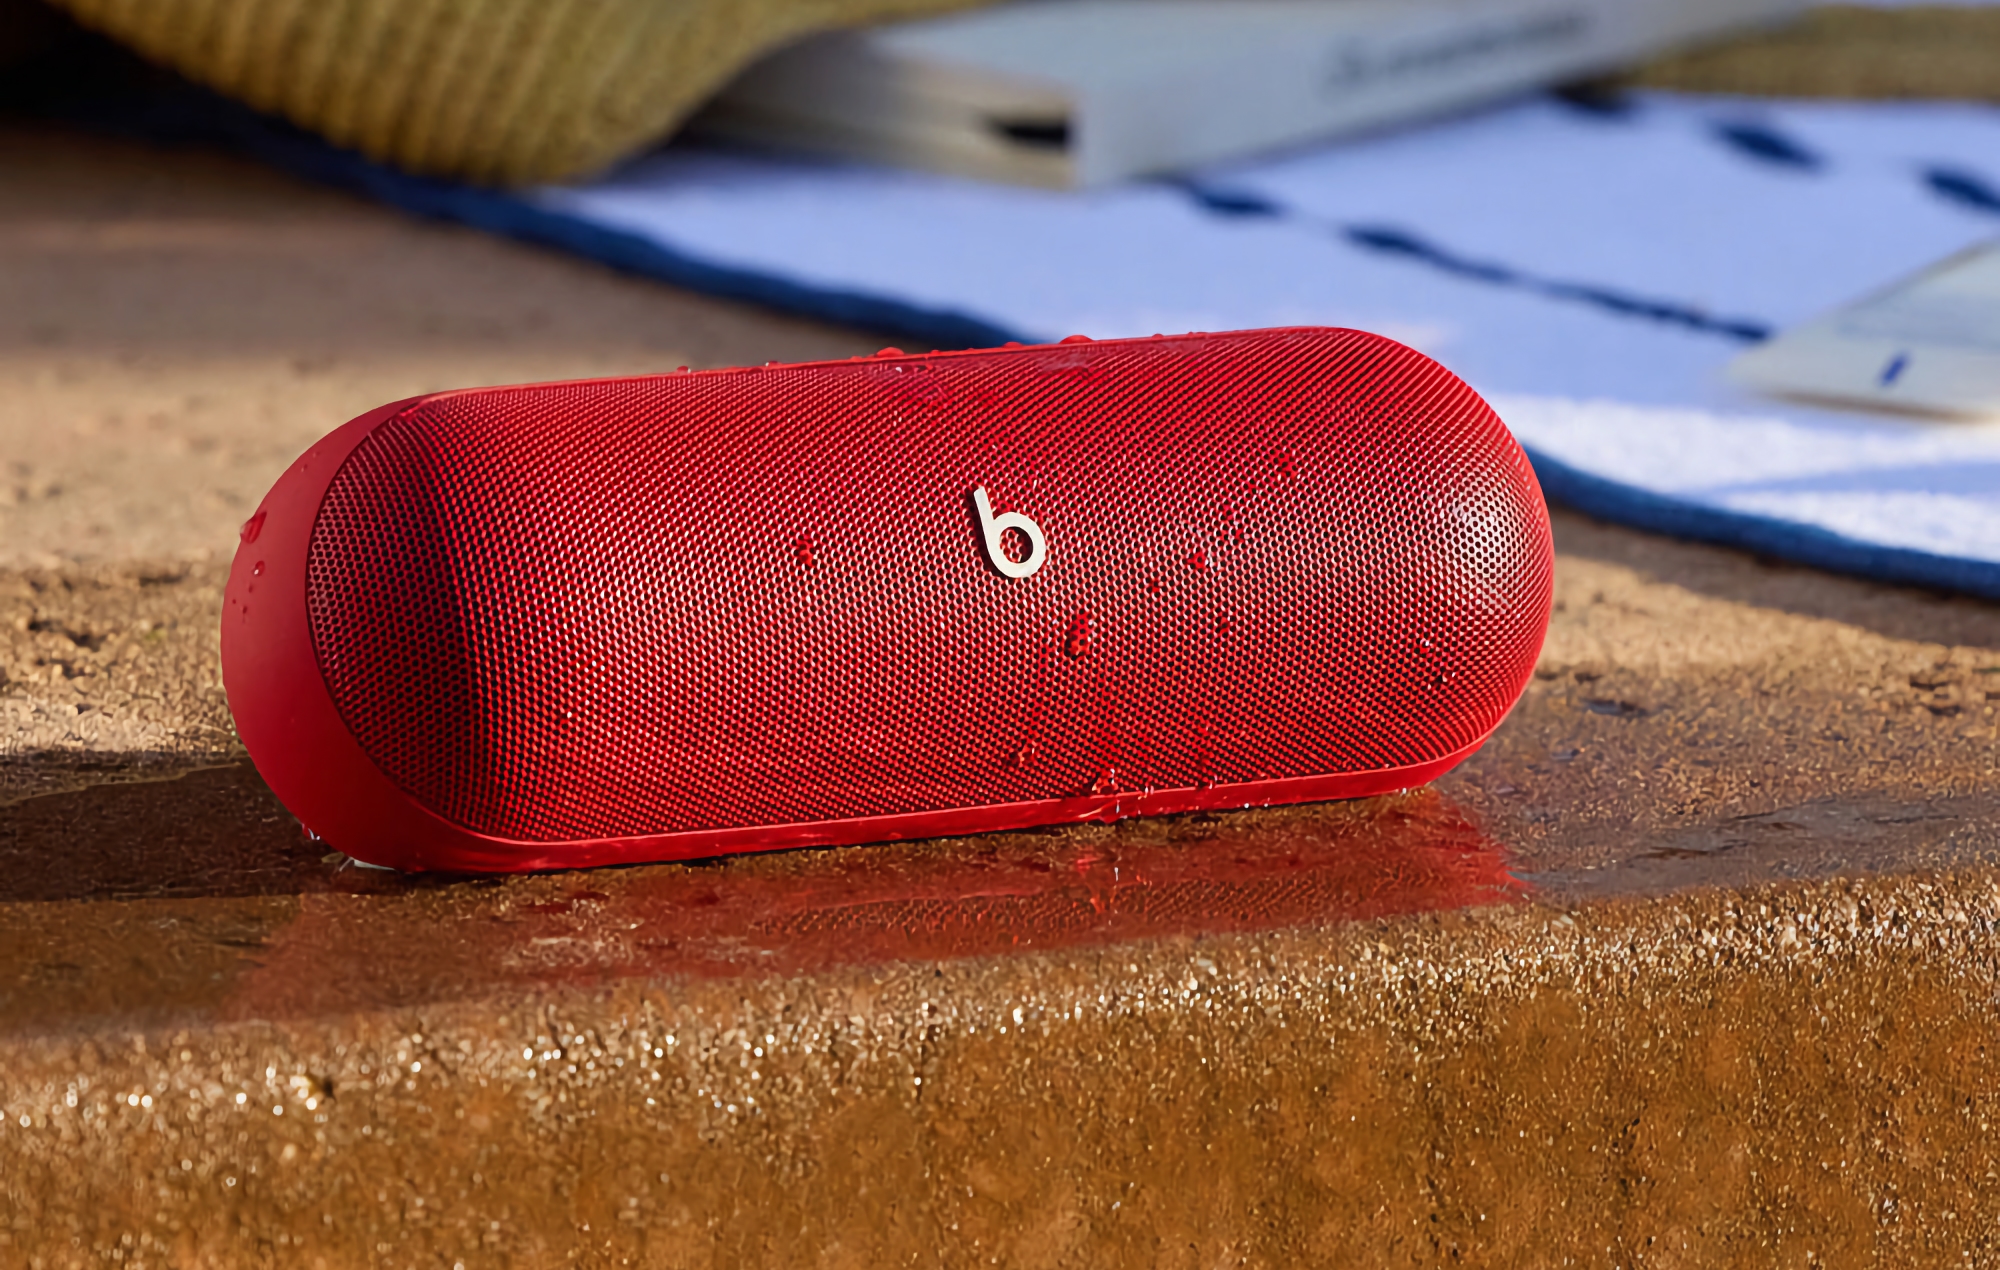 Beats Pill: improved sound, IP67 protection, up to 24 hours of battery life and a price of $149